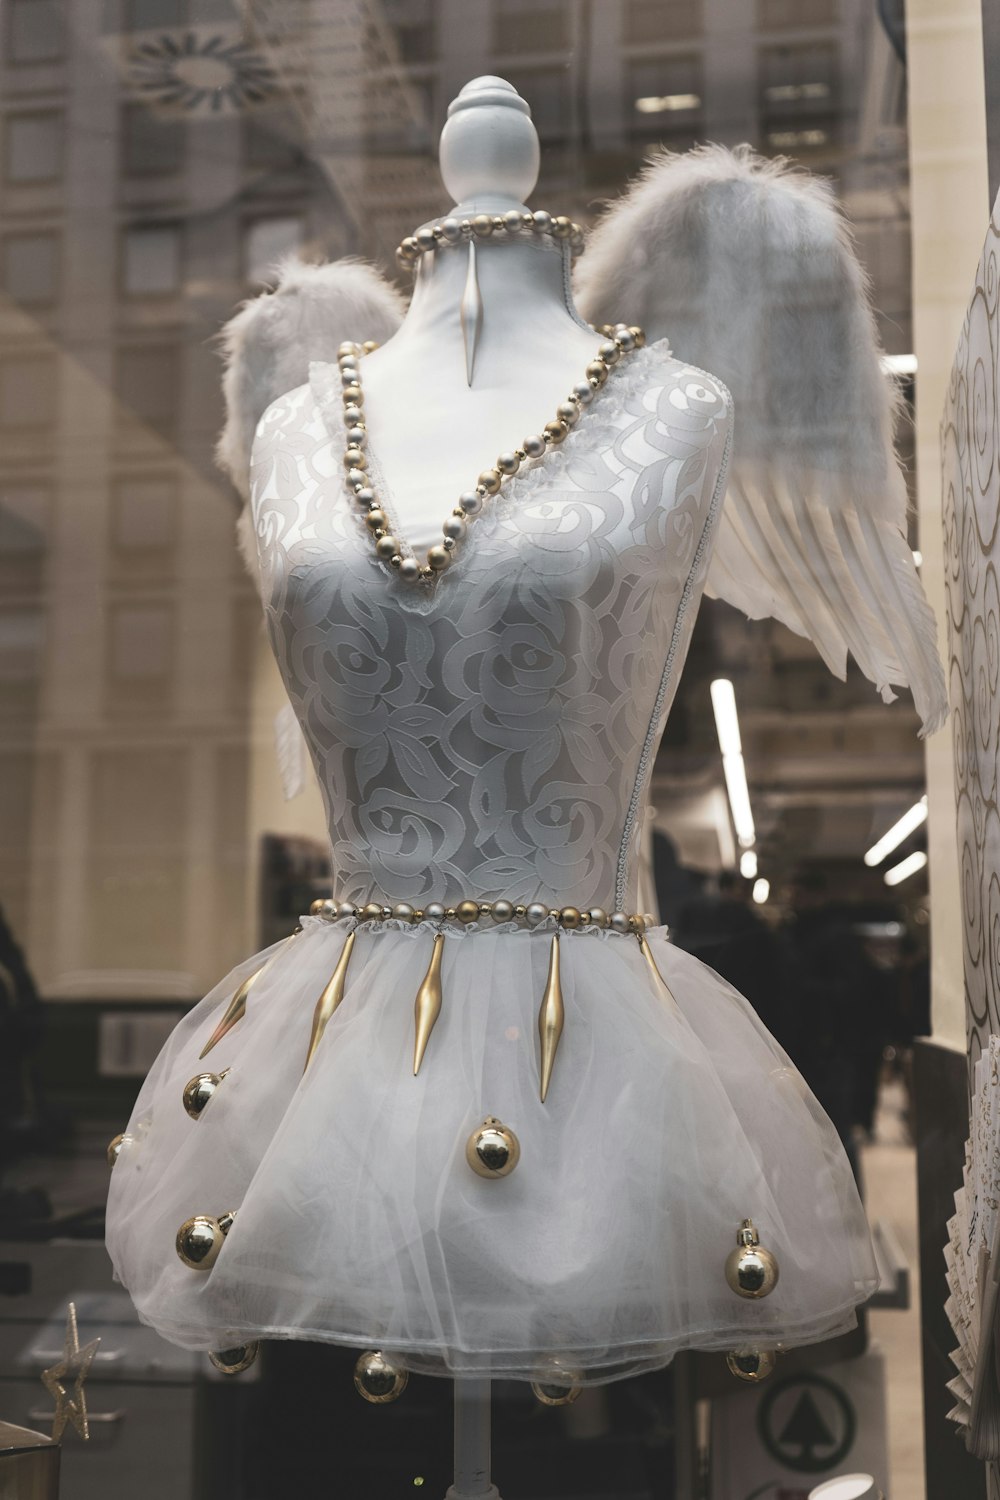 a mannequin dressed in a white dress with angel wings